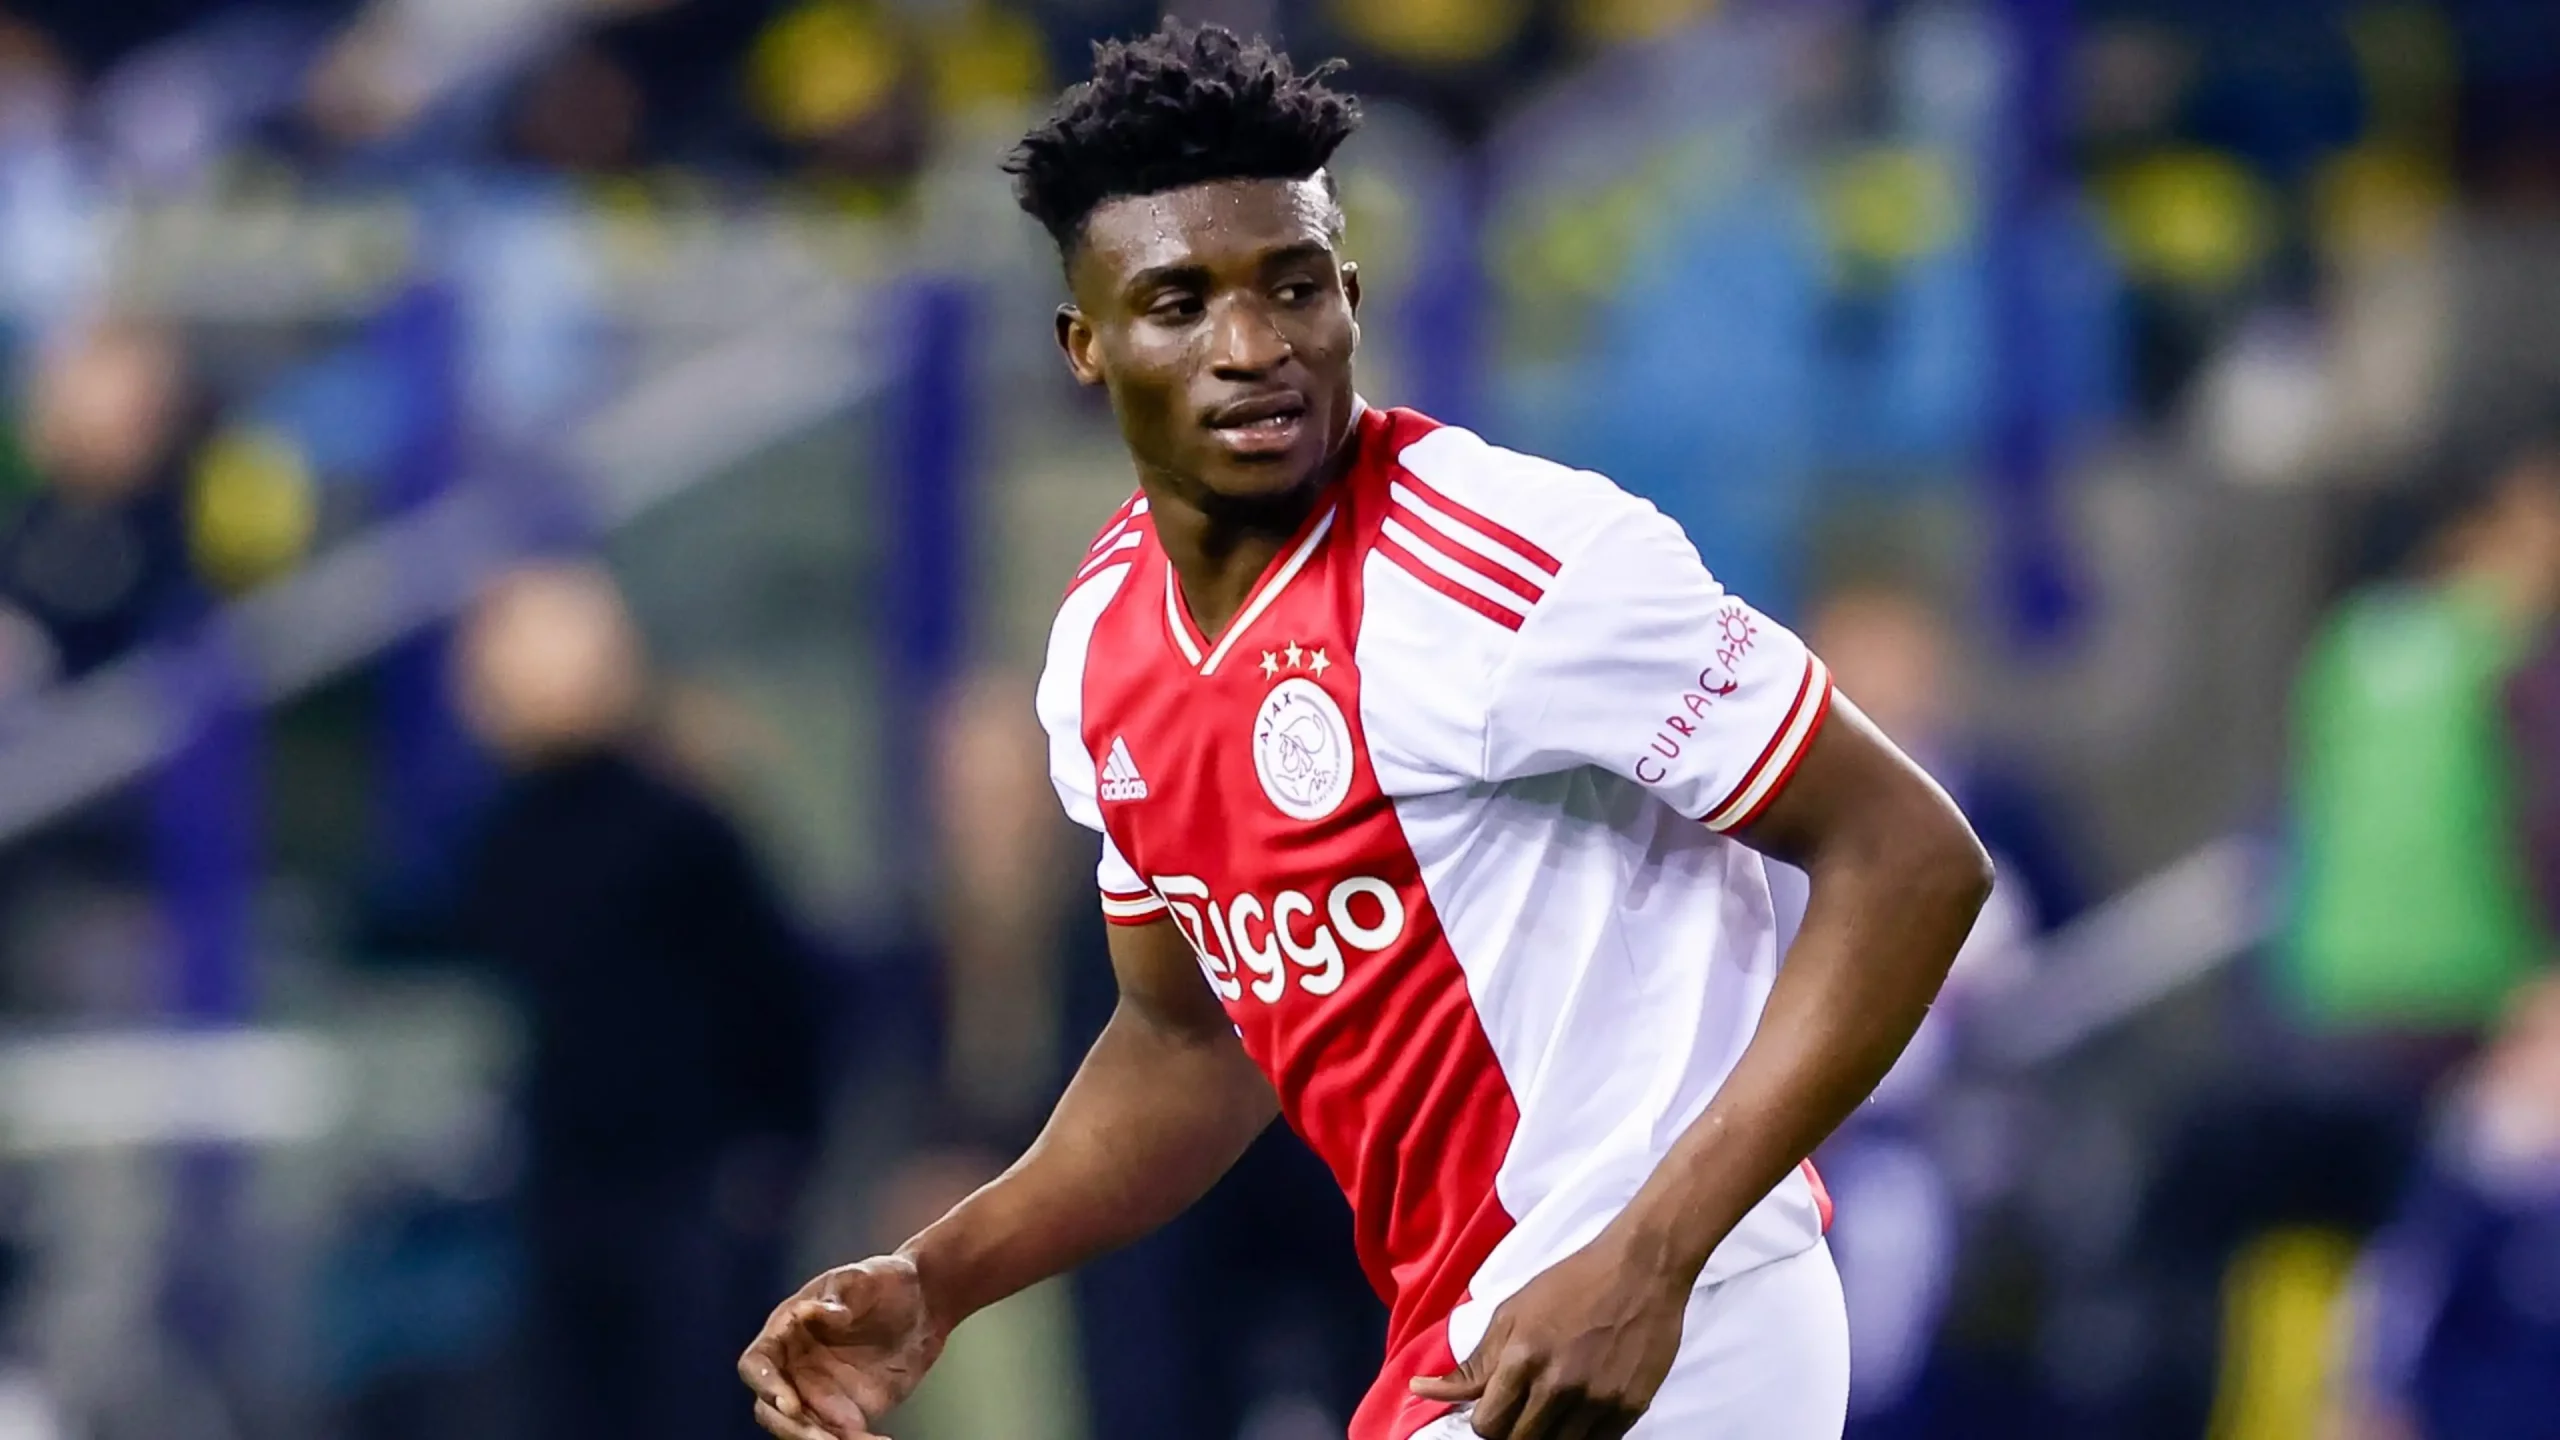 AJAX’S MOHAMMED KUDUS WILL BE SUBSTITUTE FOR LUCAS PAQUETÁ OF WEST HAM